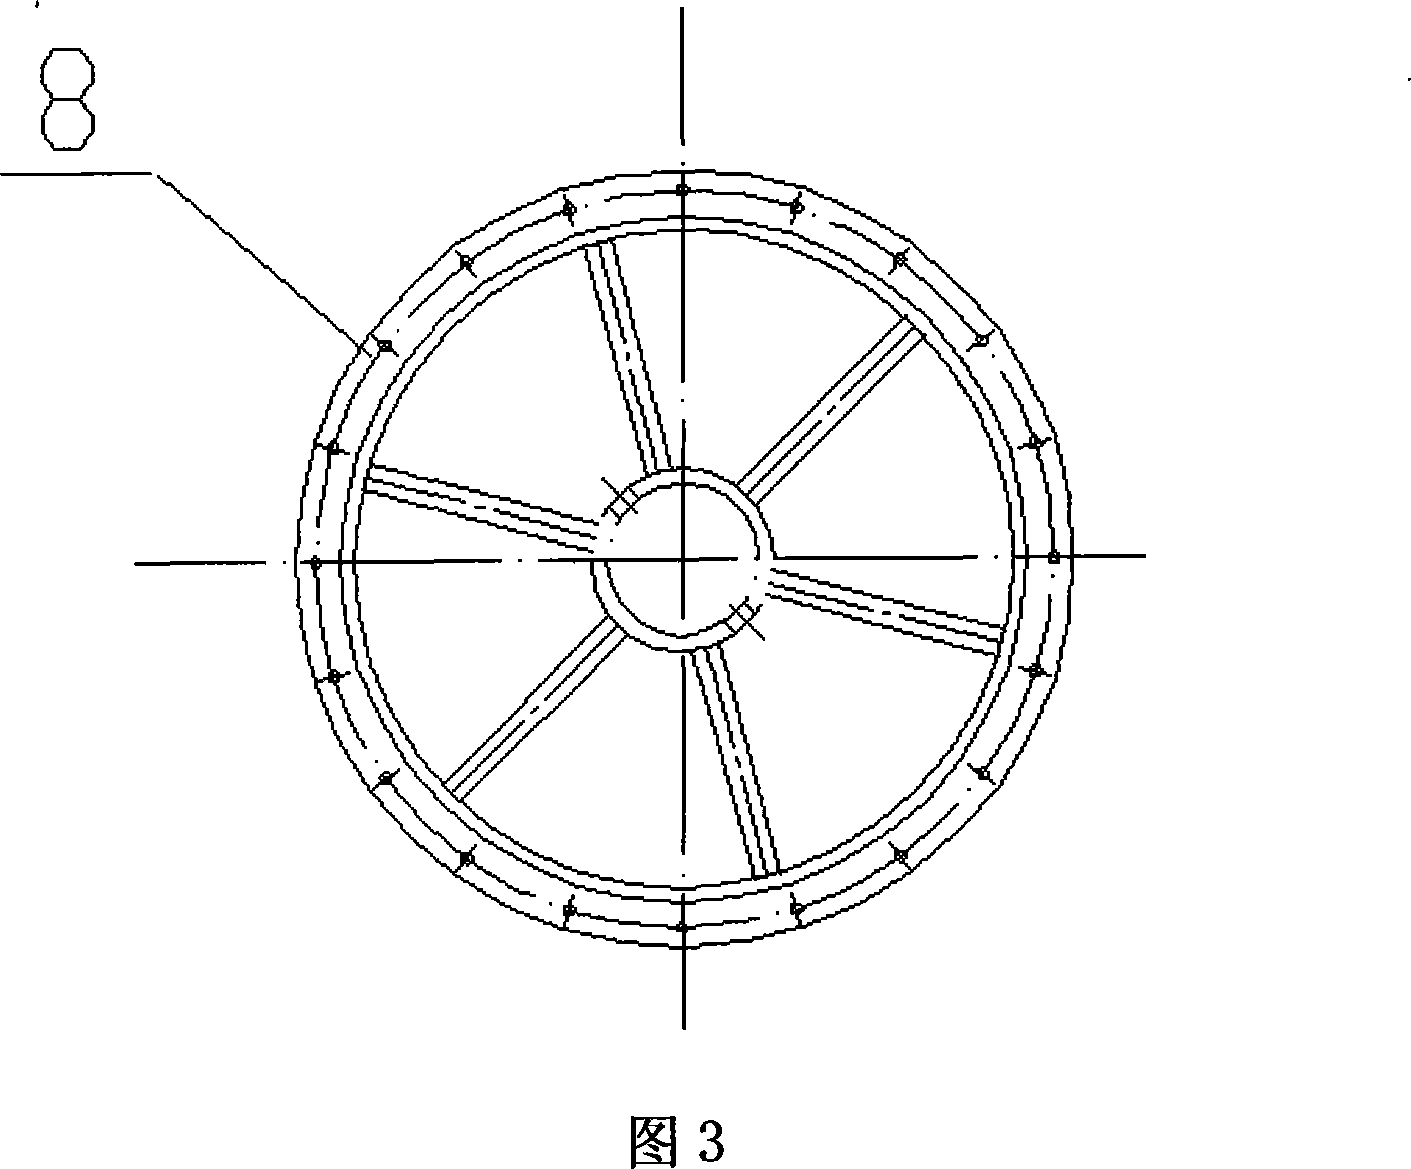 Multilevel atomizing hypergravity swinging bed with plane reticular lamina reinforced and uses thereof